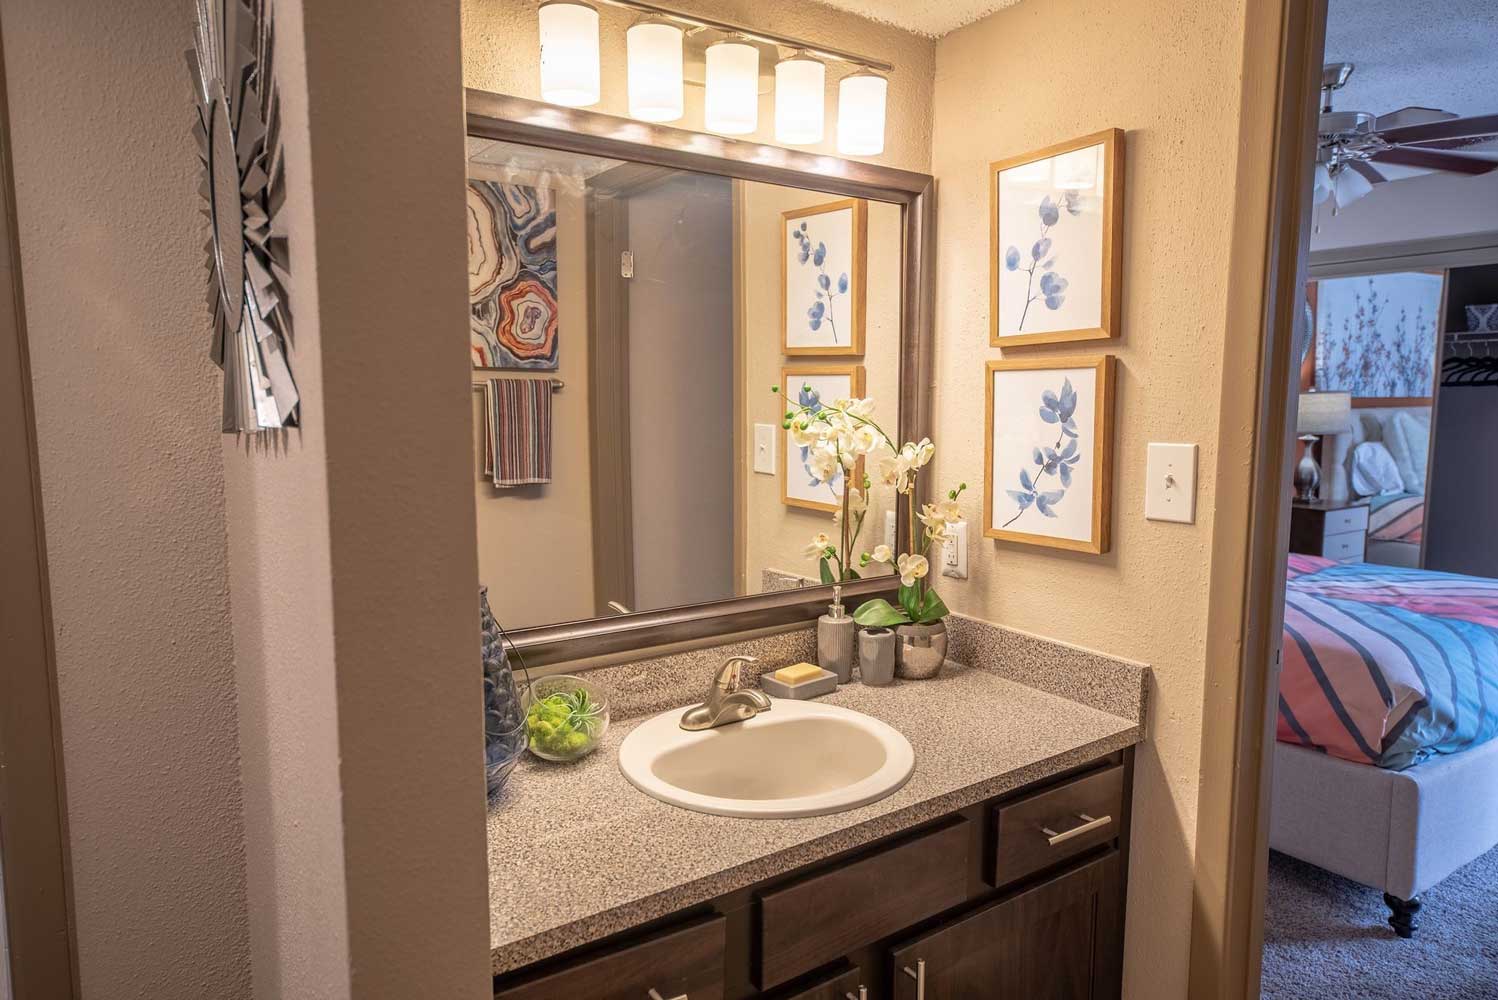 Vanity Mirror at Ridgeview Place Apartments in Irving, TX